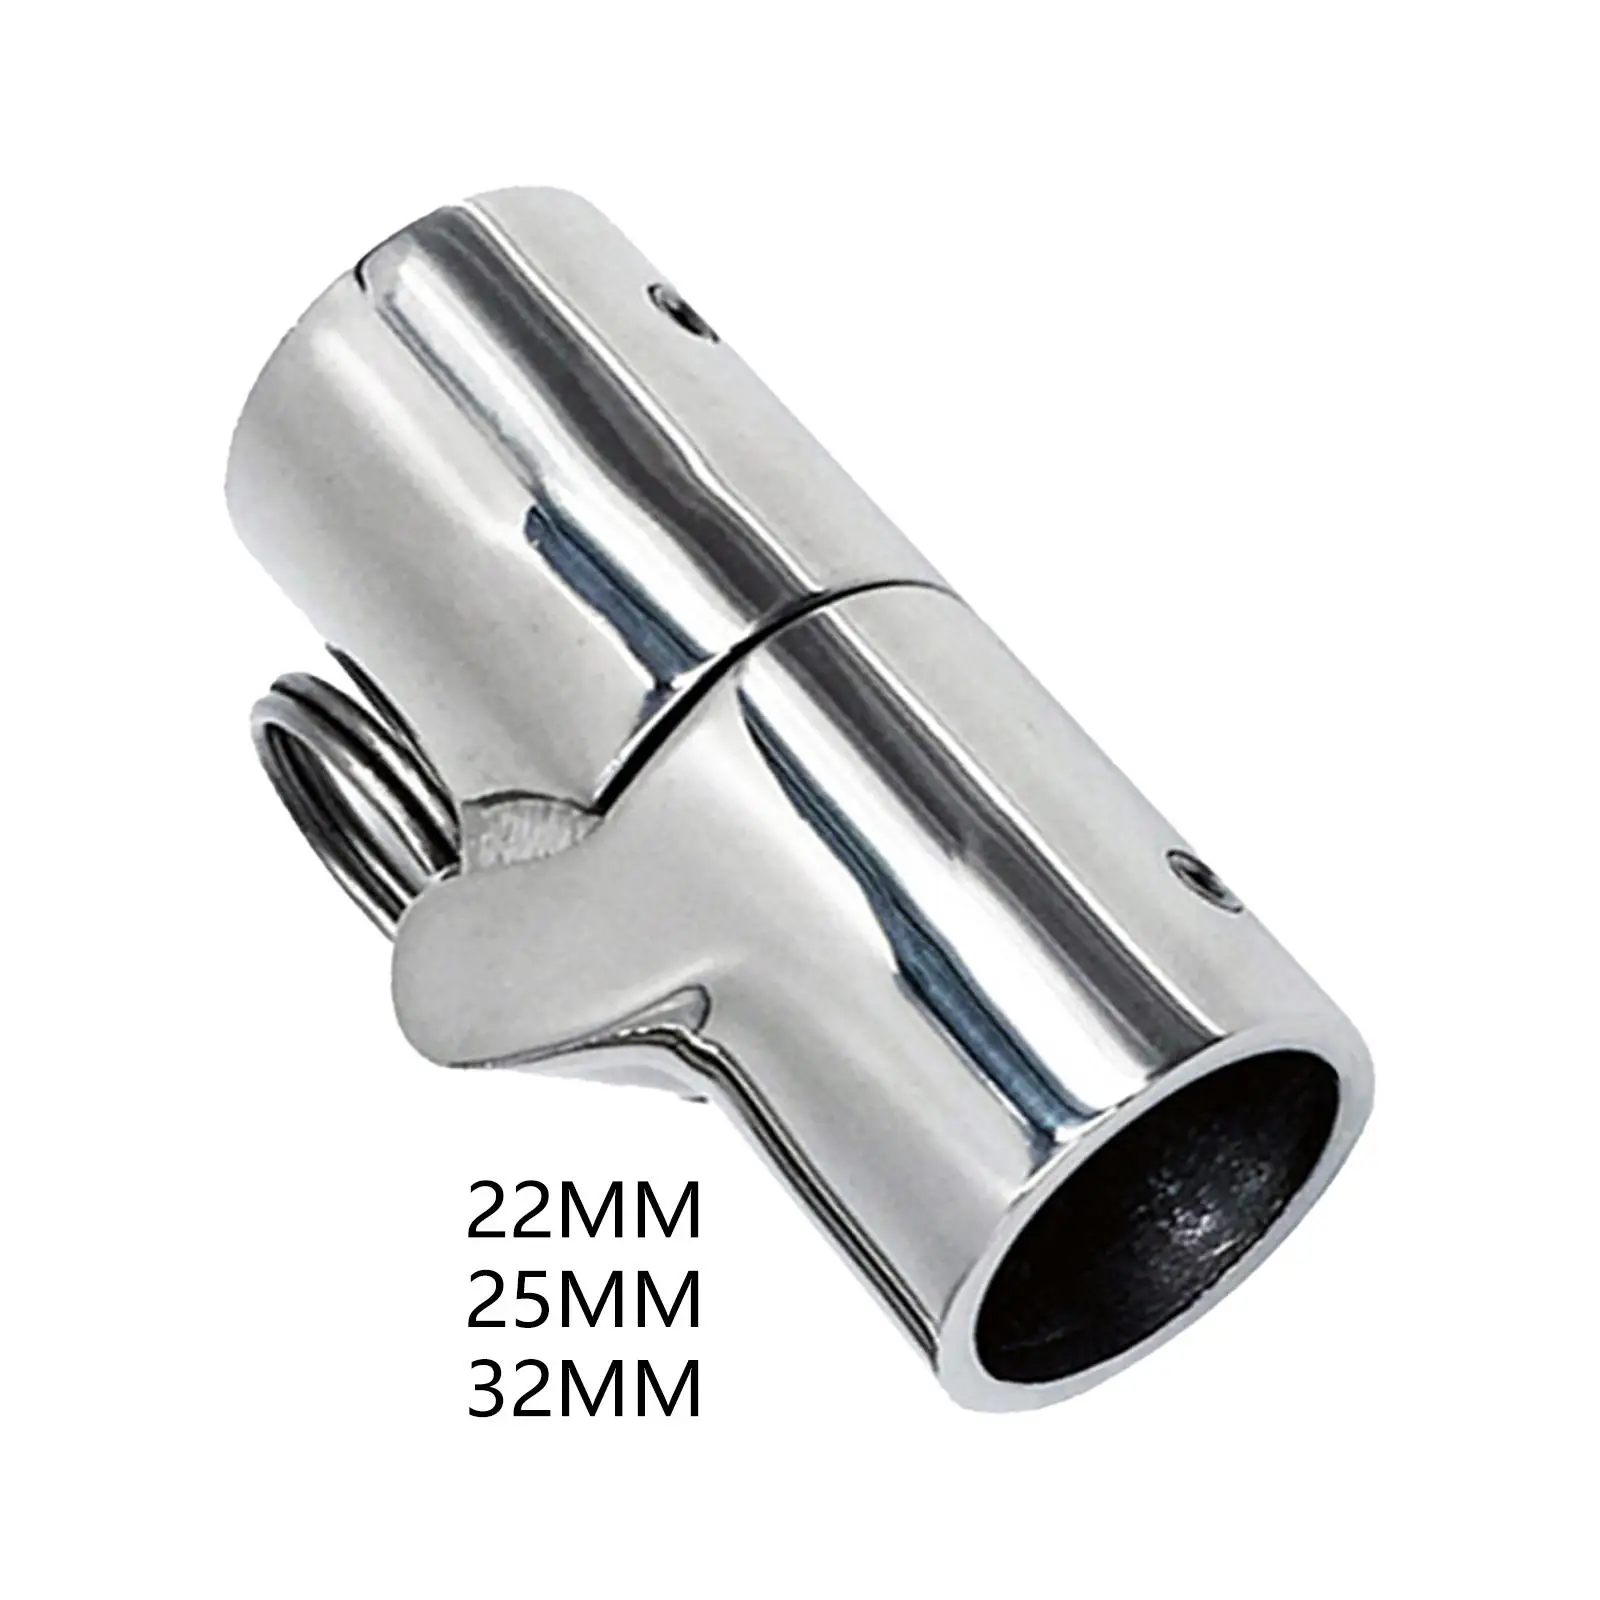 Boat Pipe Connector Handrail Fitting Folding Swivel Coupling Tube Joint Connector Tube